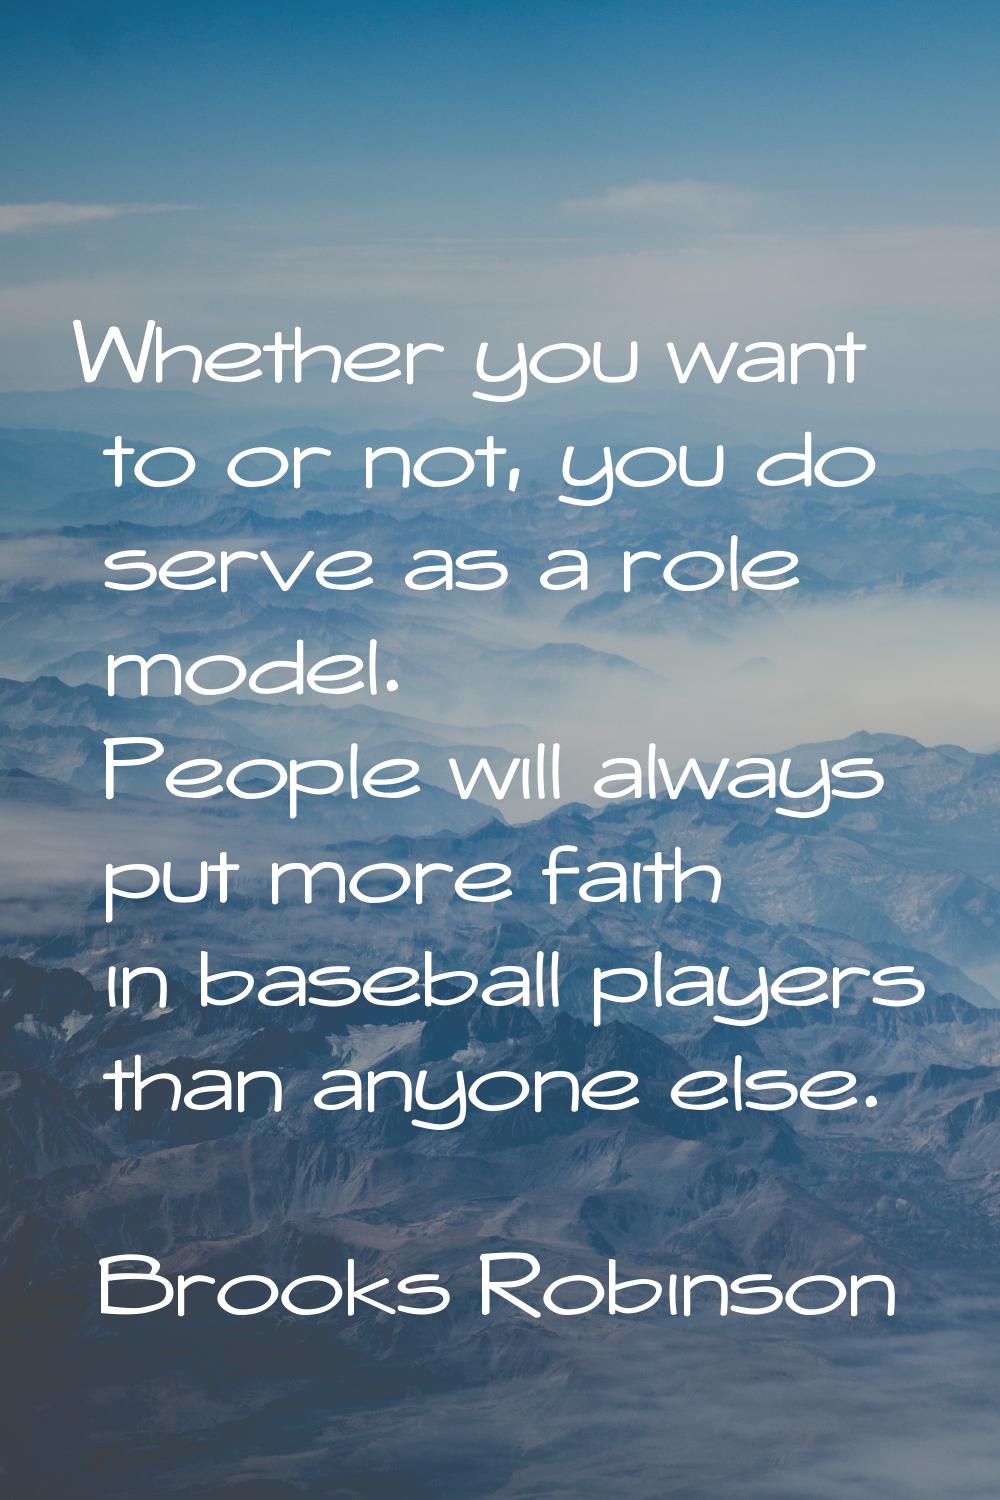 Whether you want to or not, you do serve as a role model. People will always put more faith in base